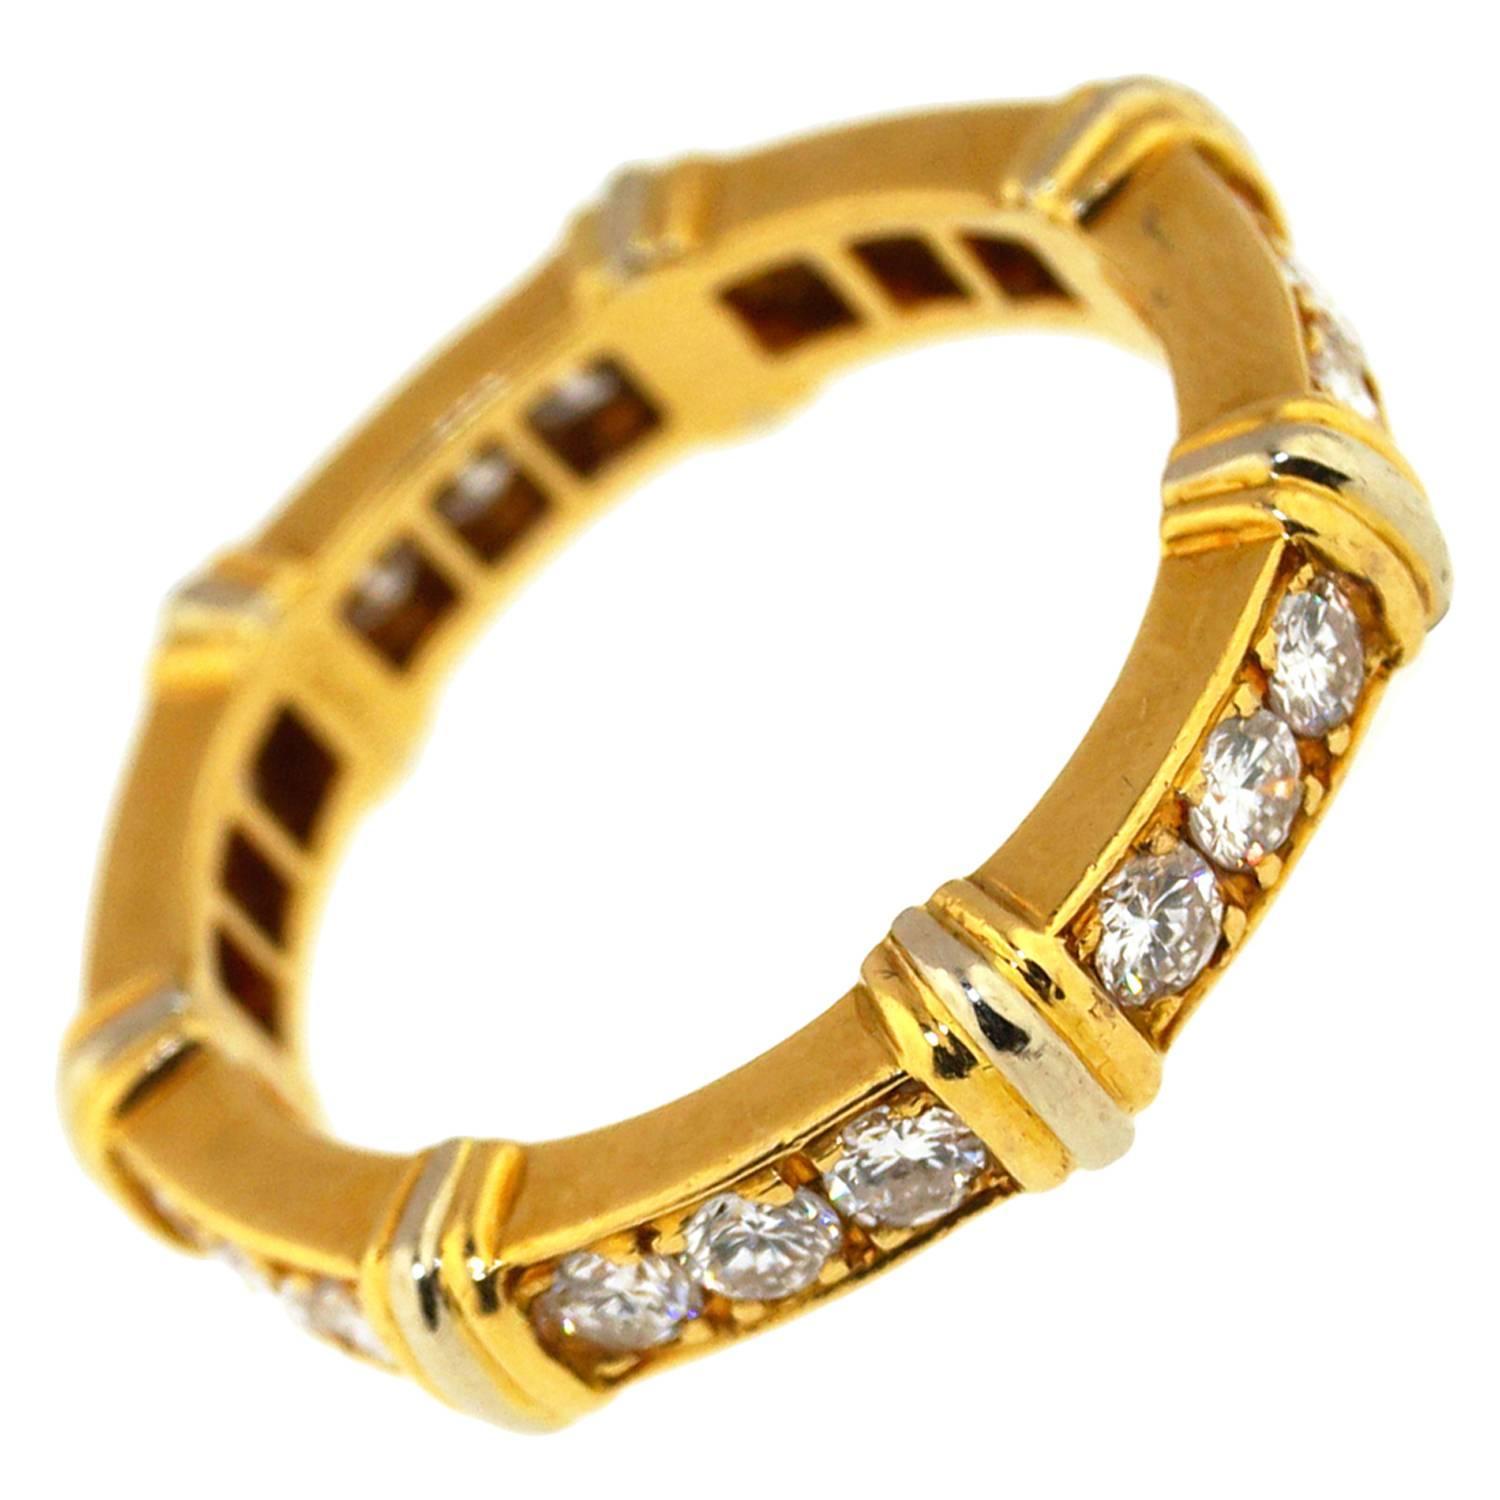 Vintage Cartier Diamond Band Ring 